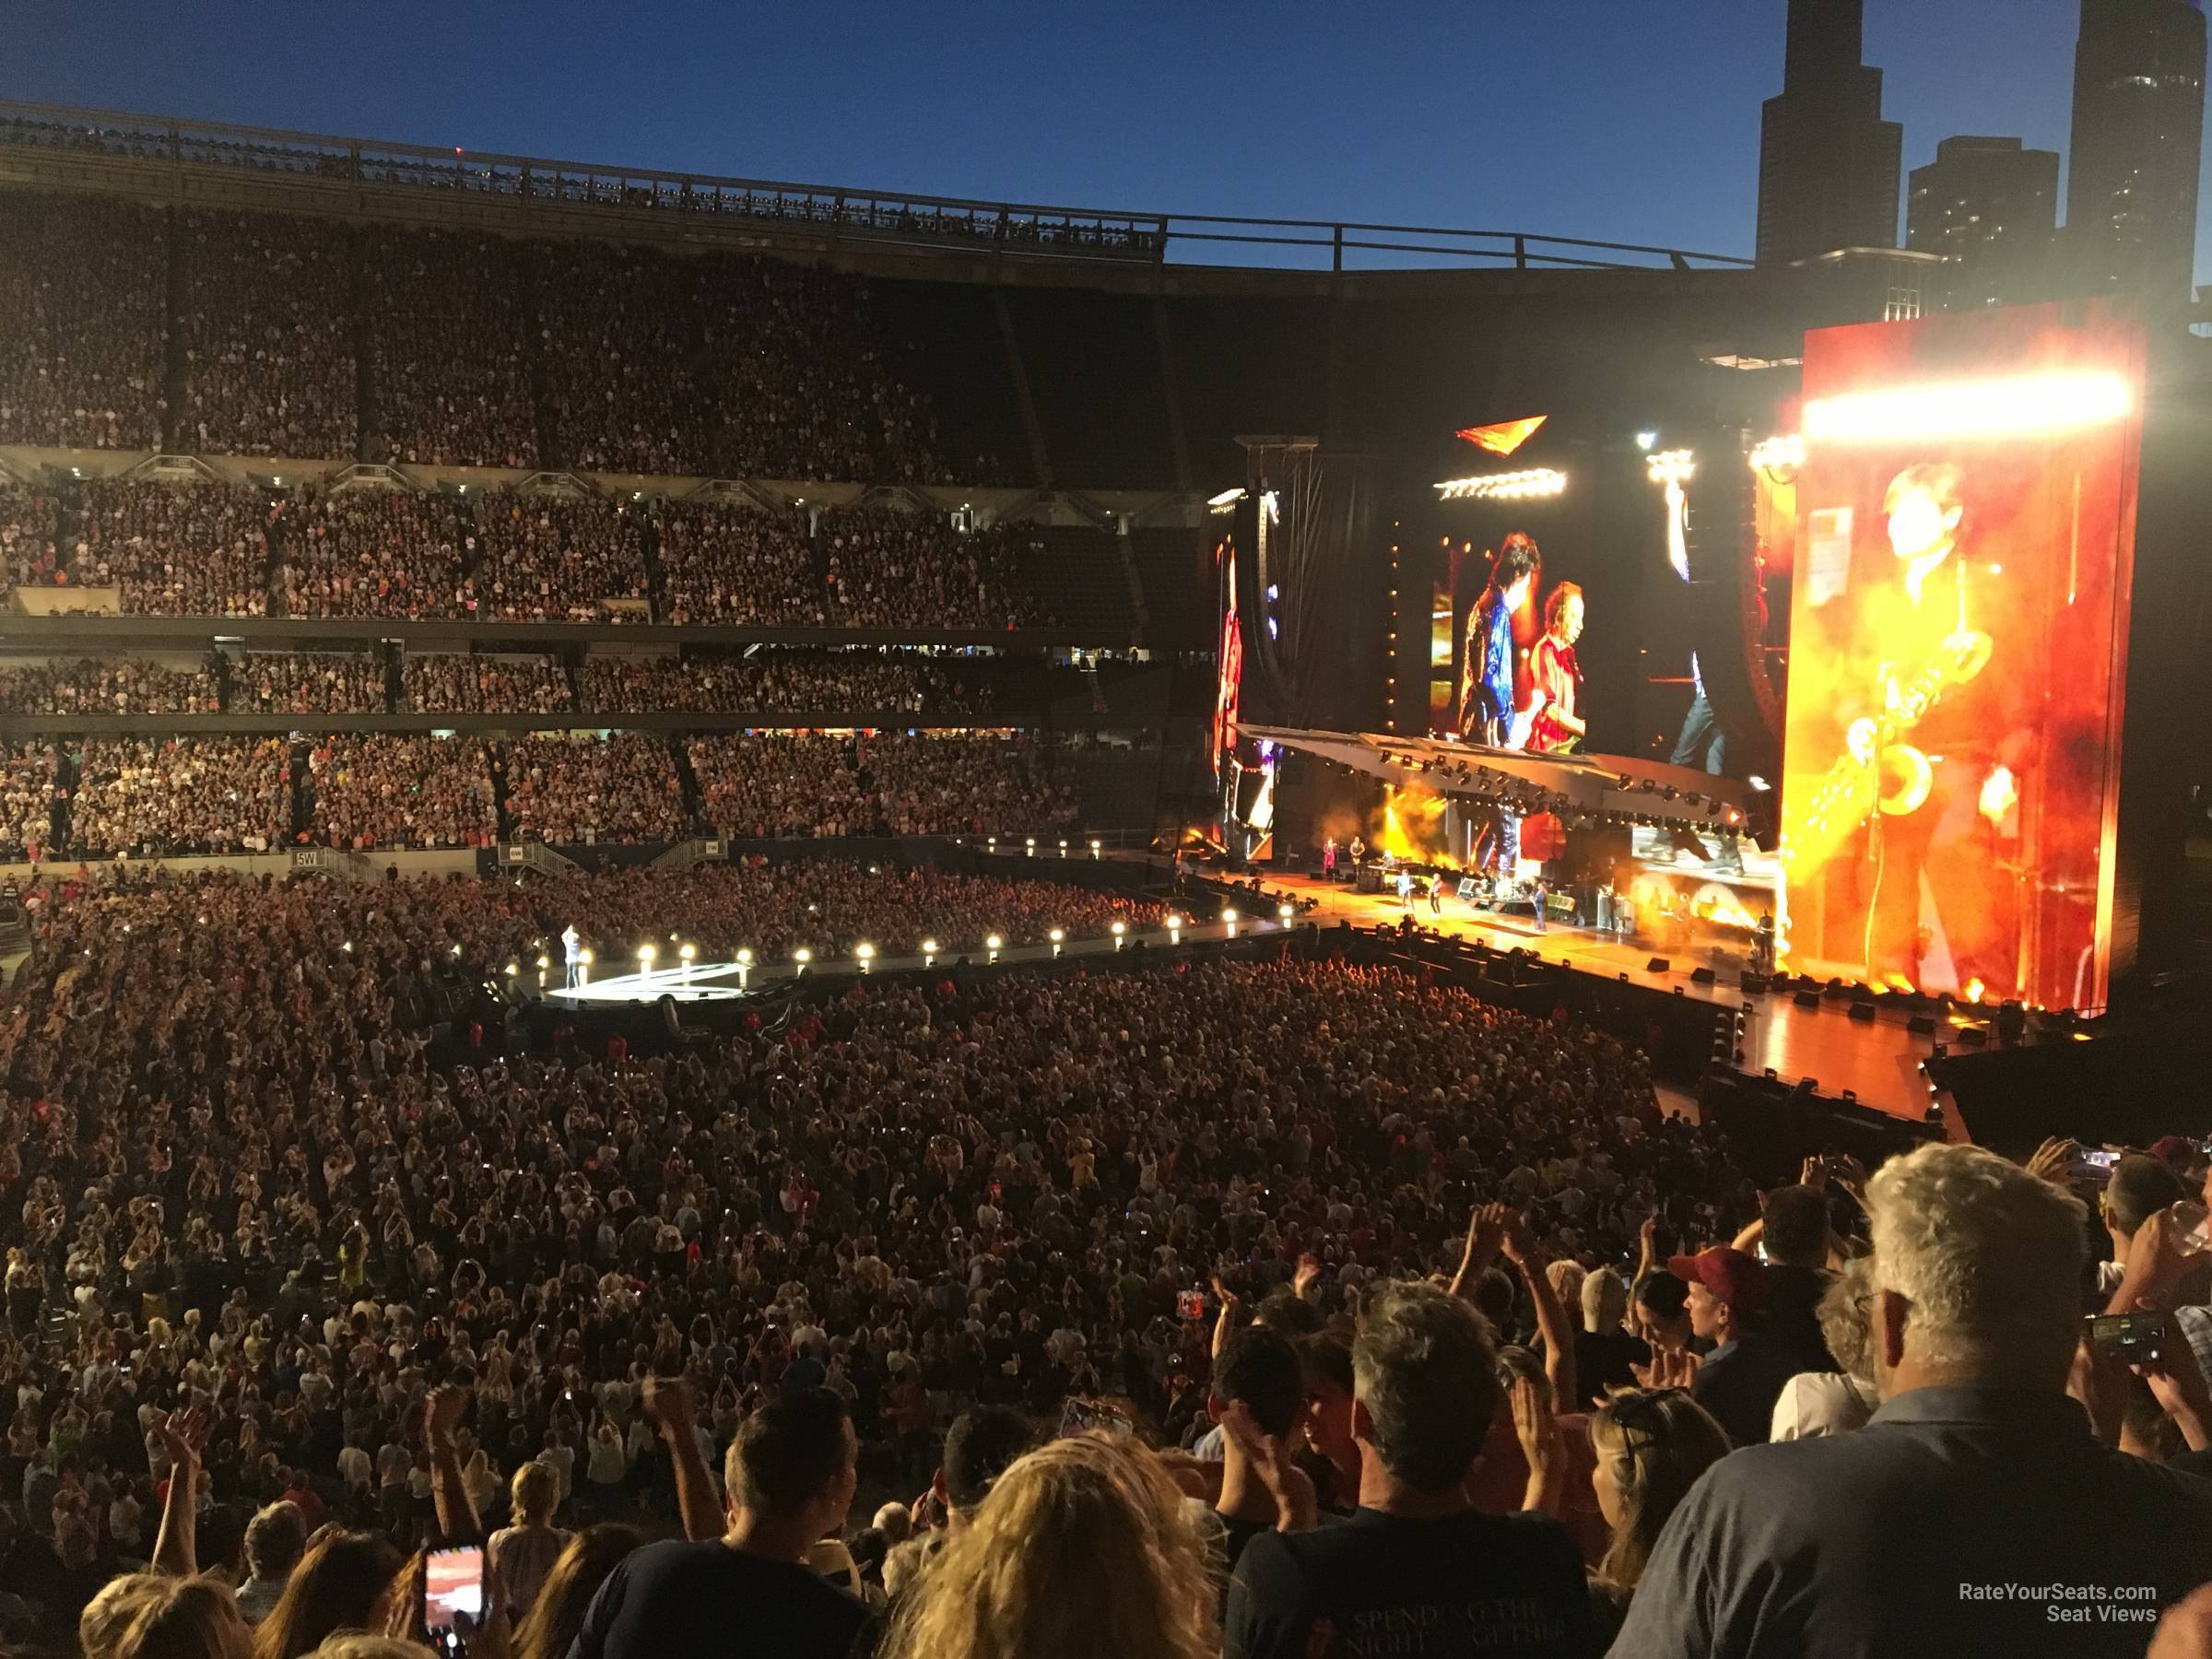 section 209, row 10 seat view  for concert - soldier field